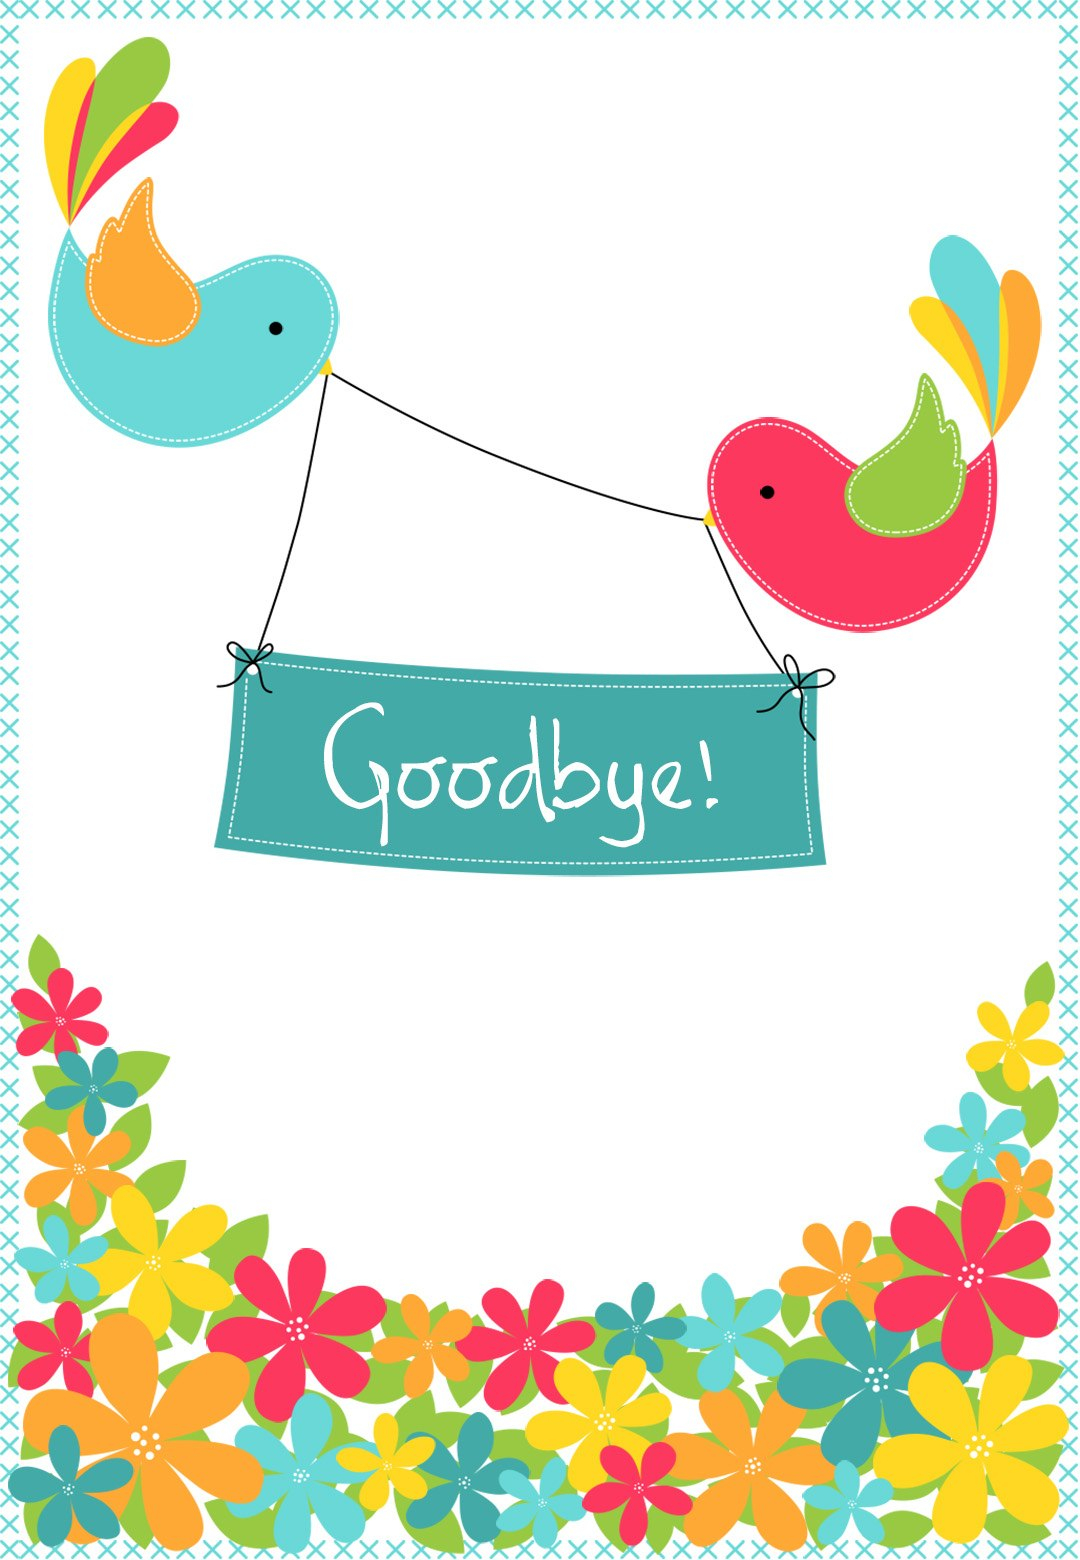 Goodbye From Your Colleagues  Good Luck Card Free  Greetings Island for Goodbye Card Template